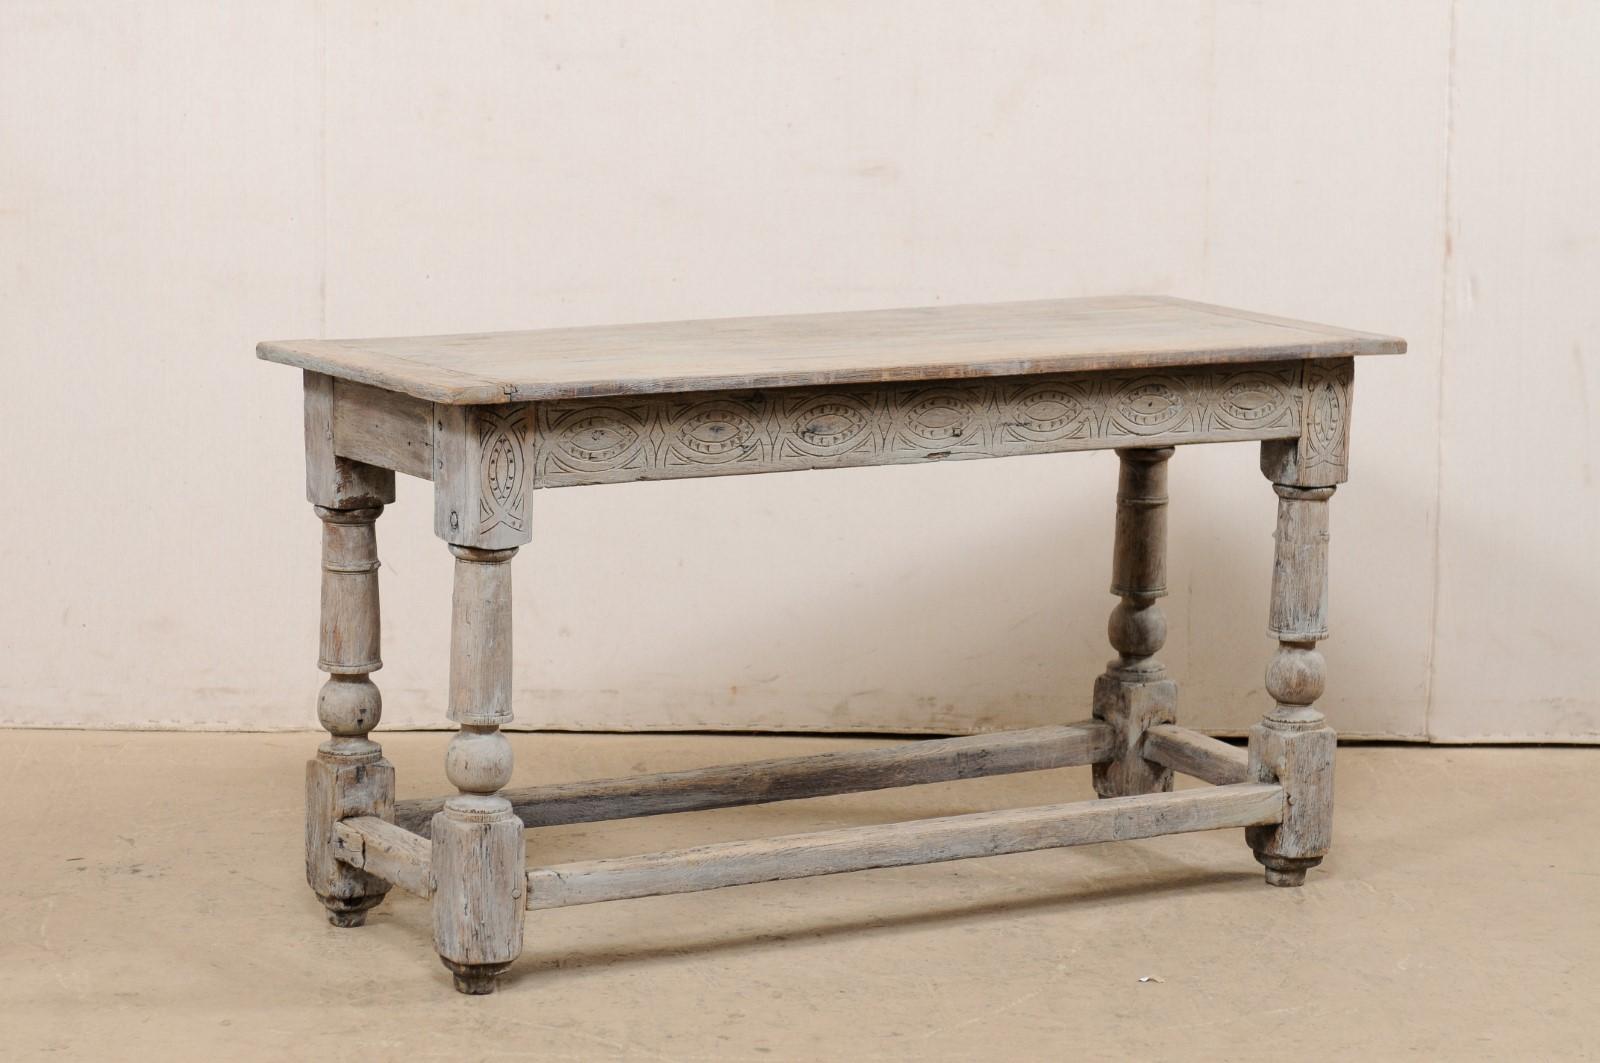 An English carved and painted wood console table from the turn of the 18th and 19th century. This antique table from England features a rectangular-shaped, plank-board top which overhangs the apron below which is carved along its longer, front side